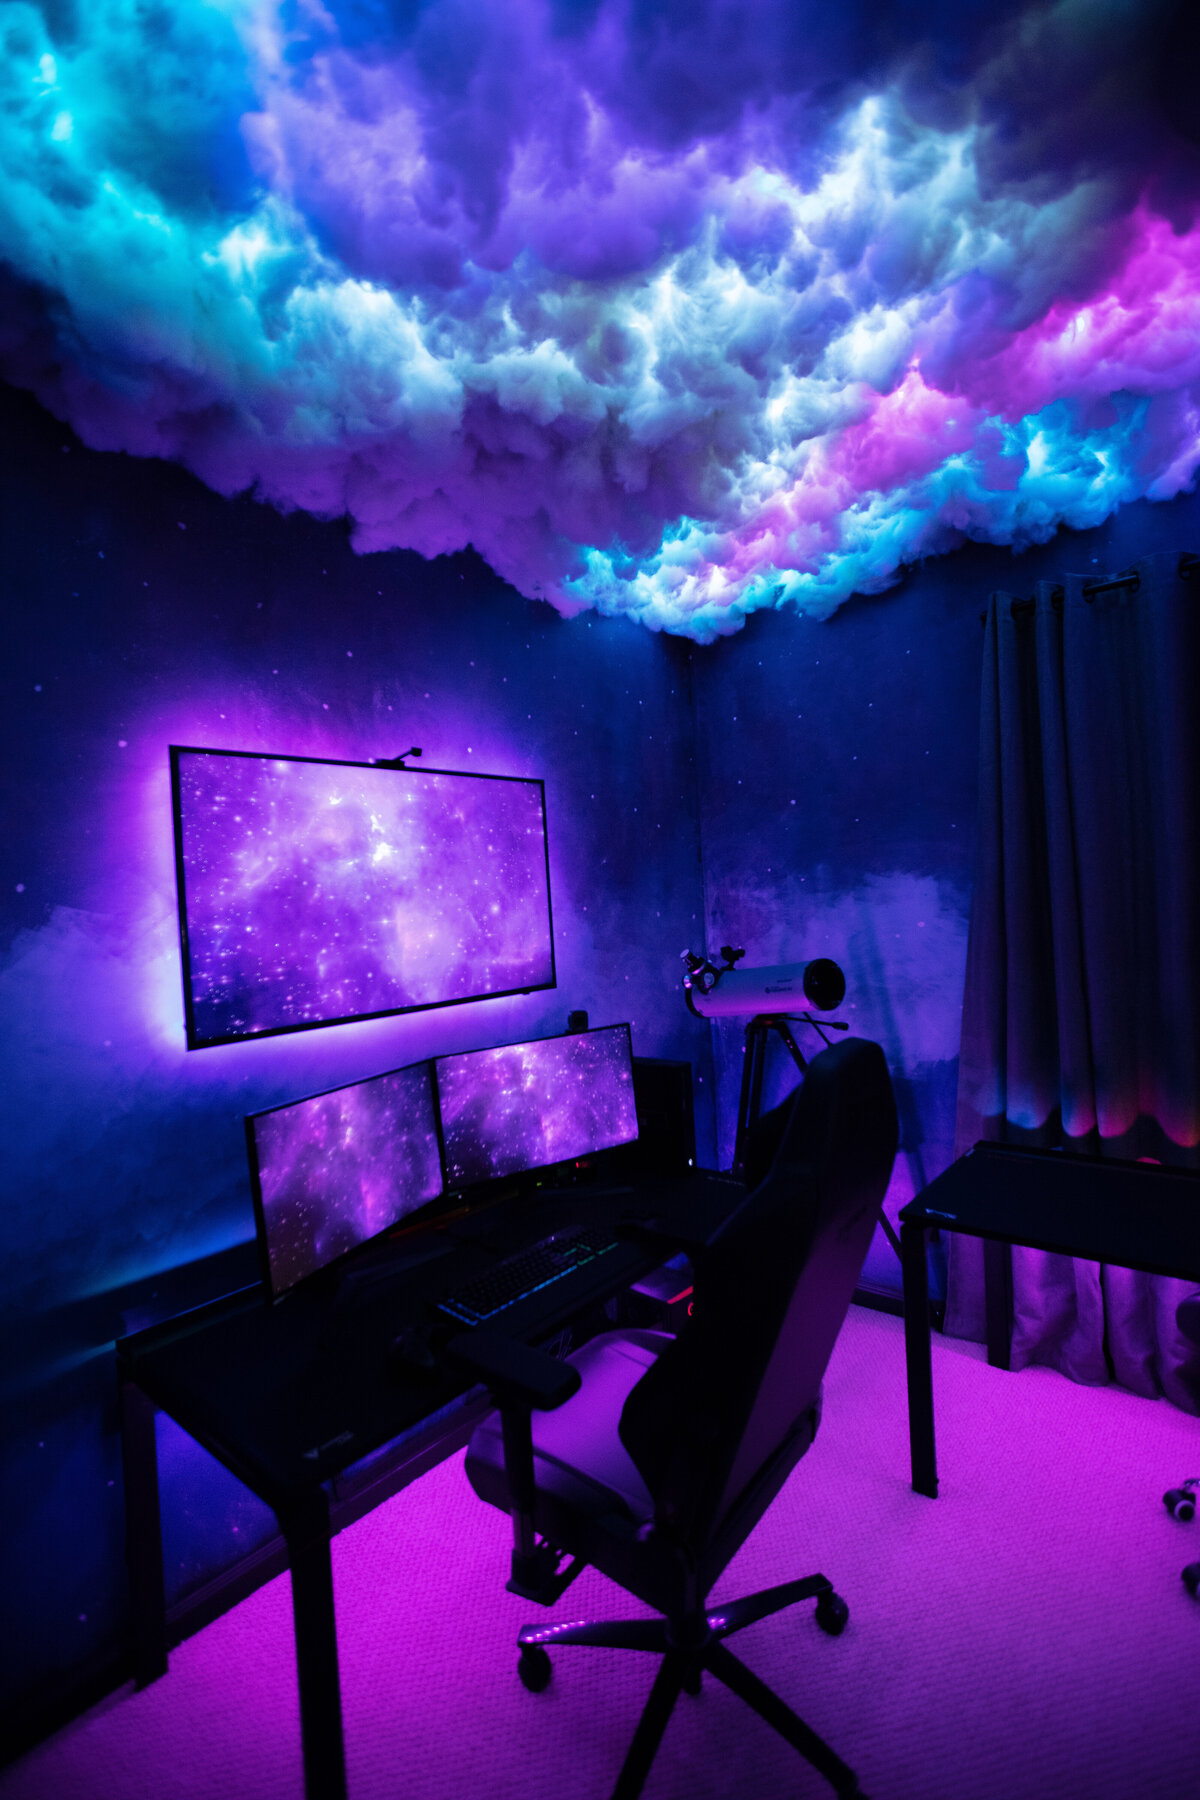 a blue, purple, and pink galaxy design on a ceiling